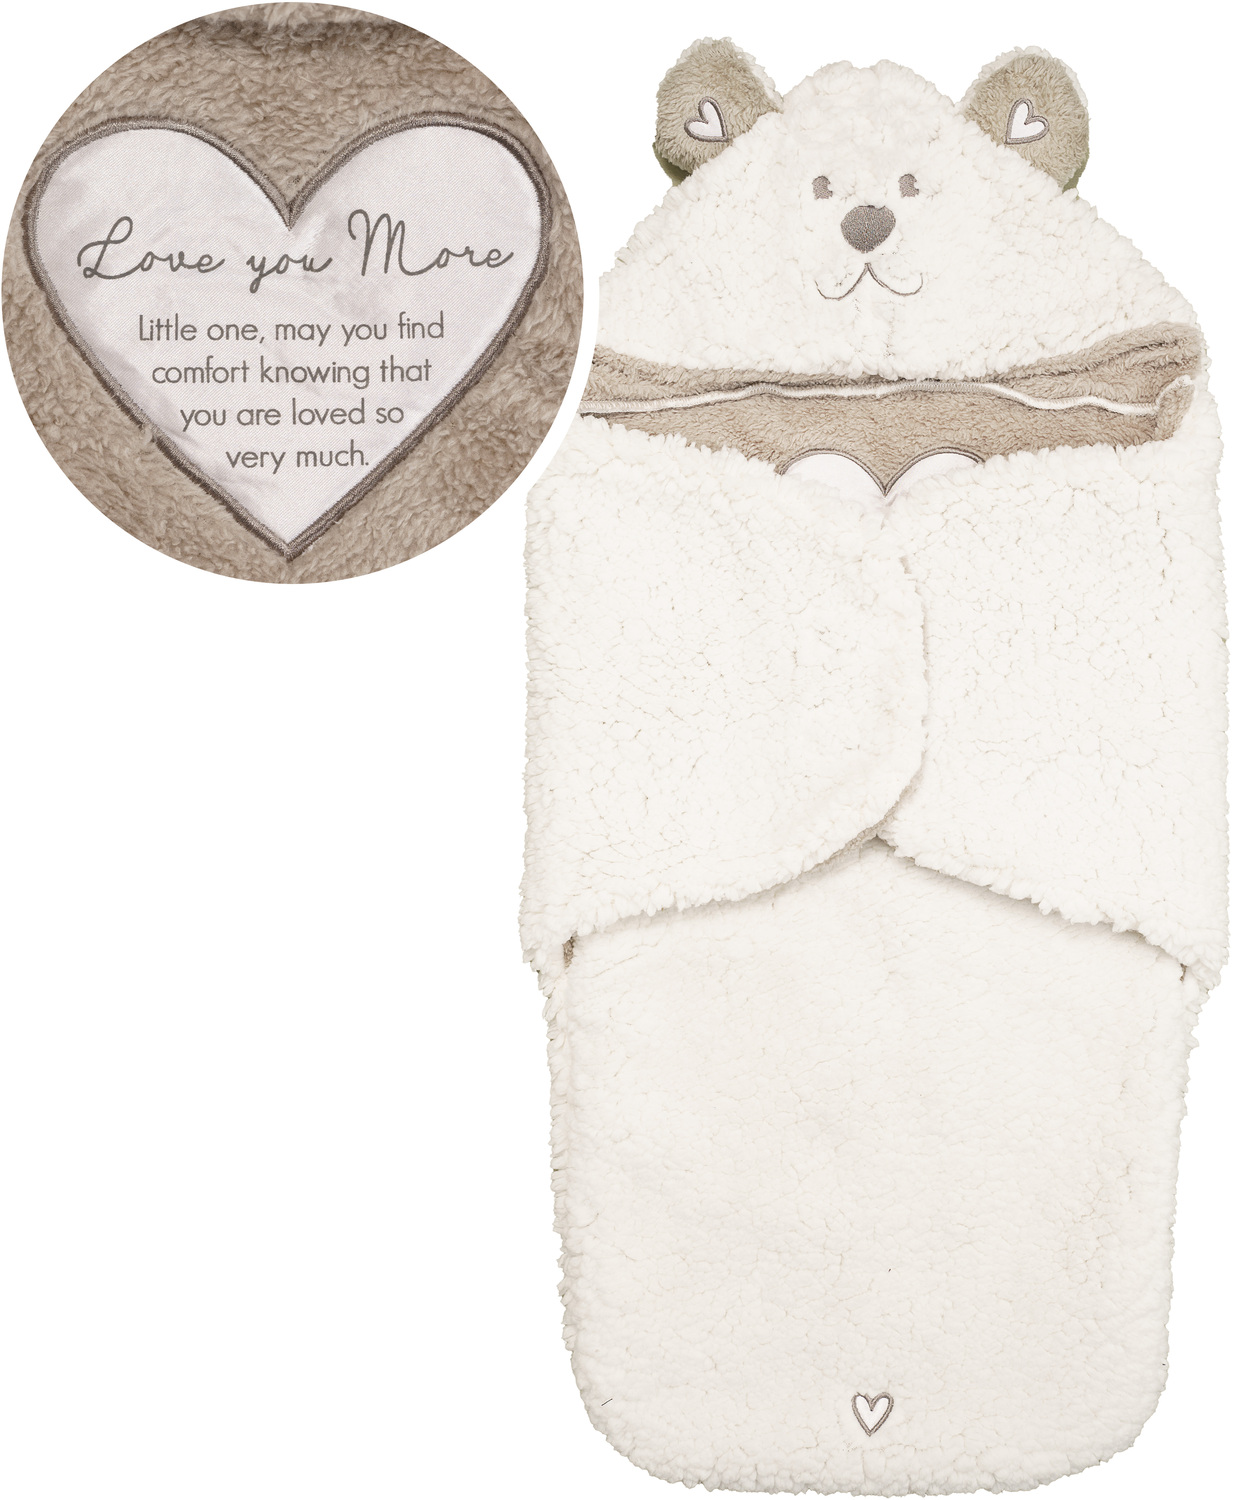 Love You More by Comfort Blanket - Love You More - 0-6 Months Swaddle Blanket